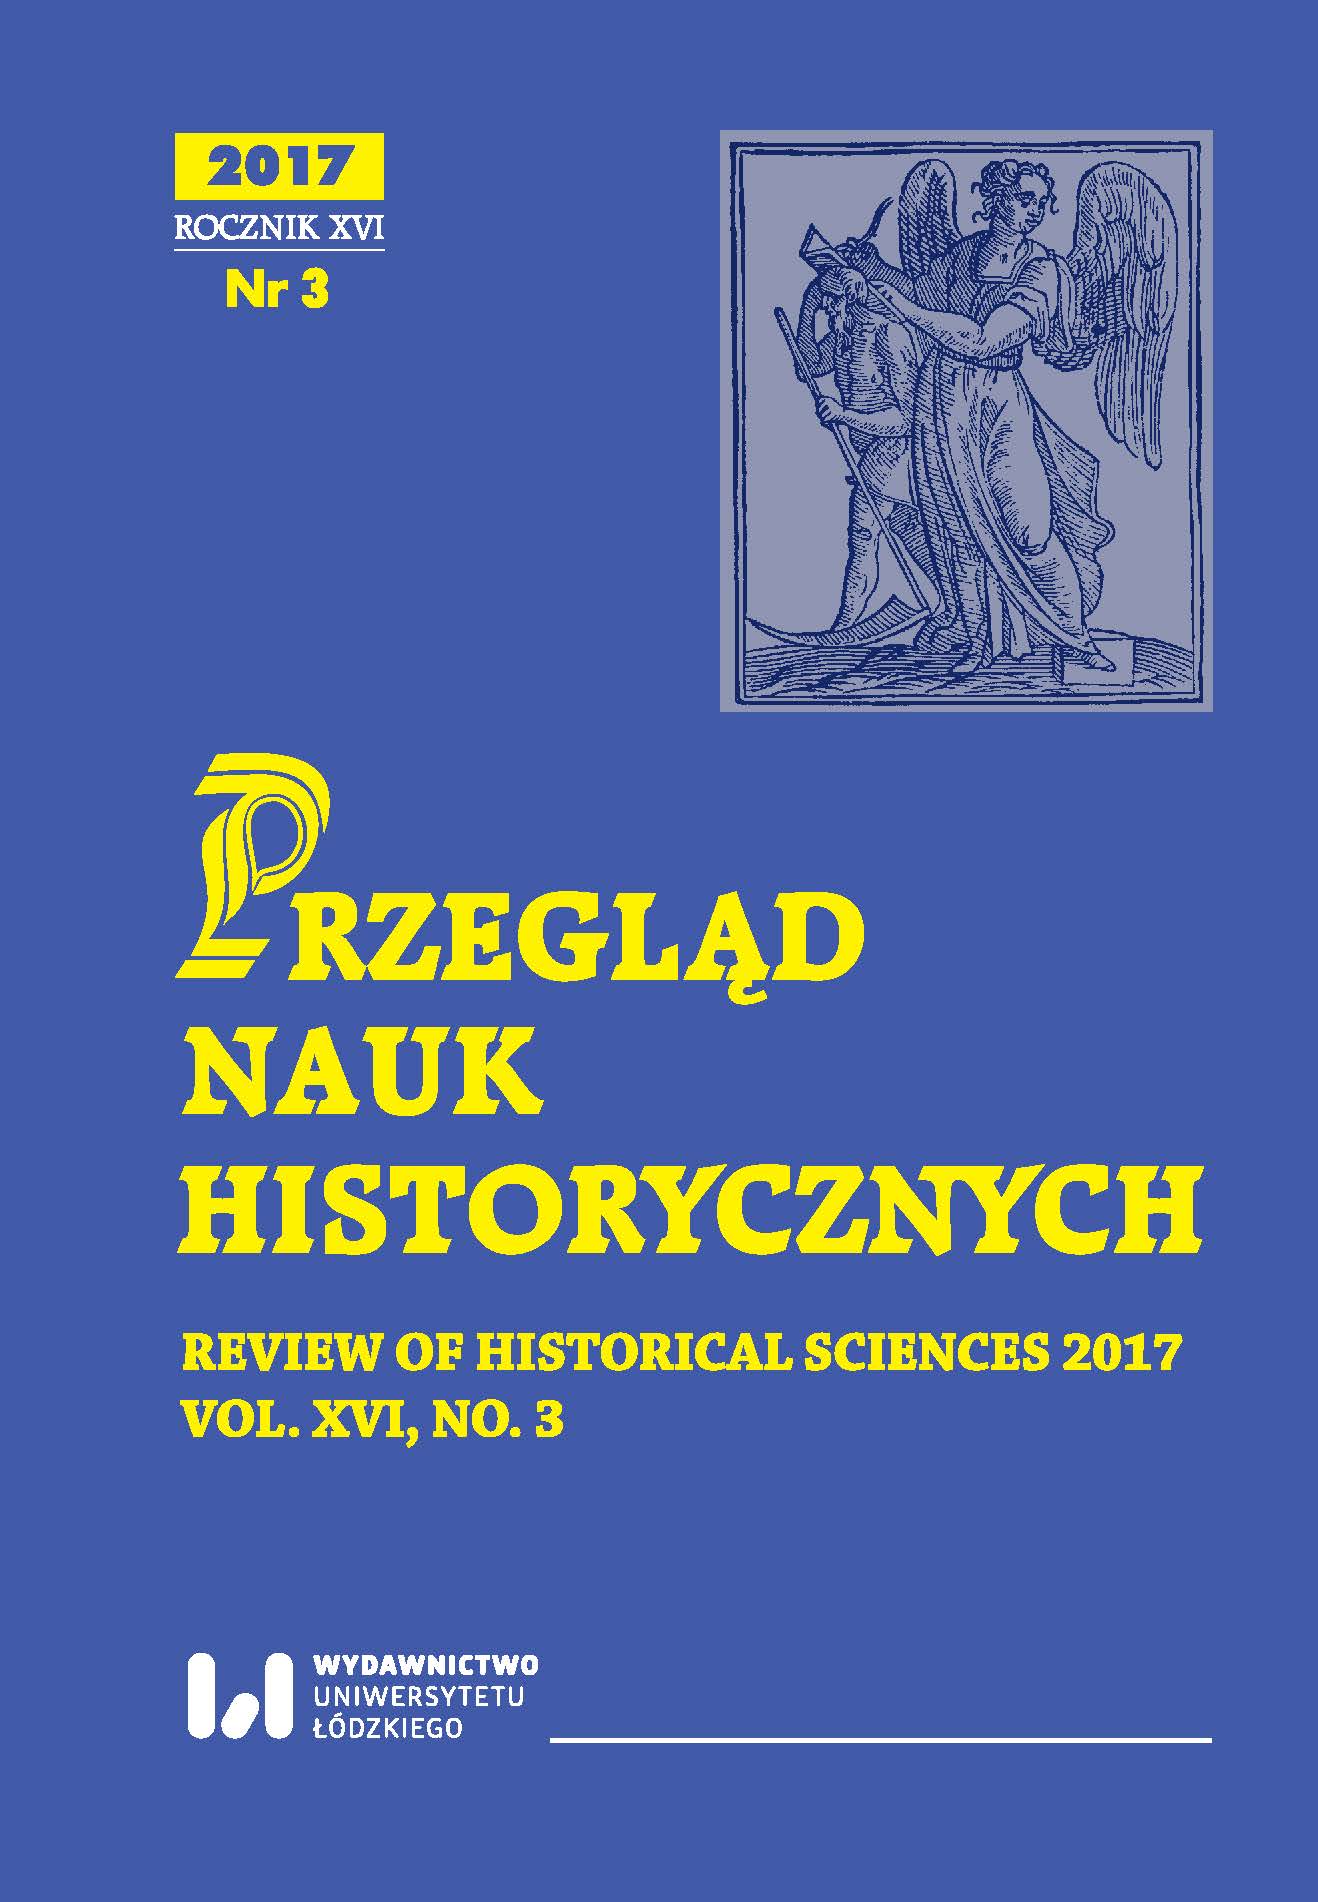 The Byzantines in the service of the Bulgarian rulers in the first half of the 9th century Cover Image